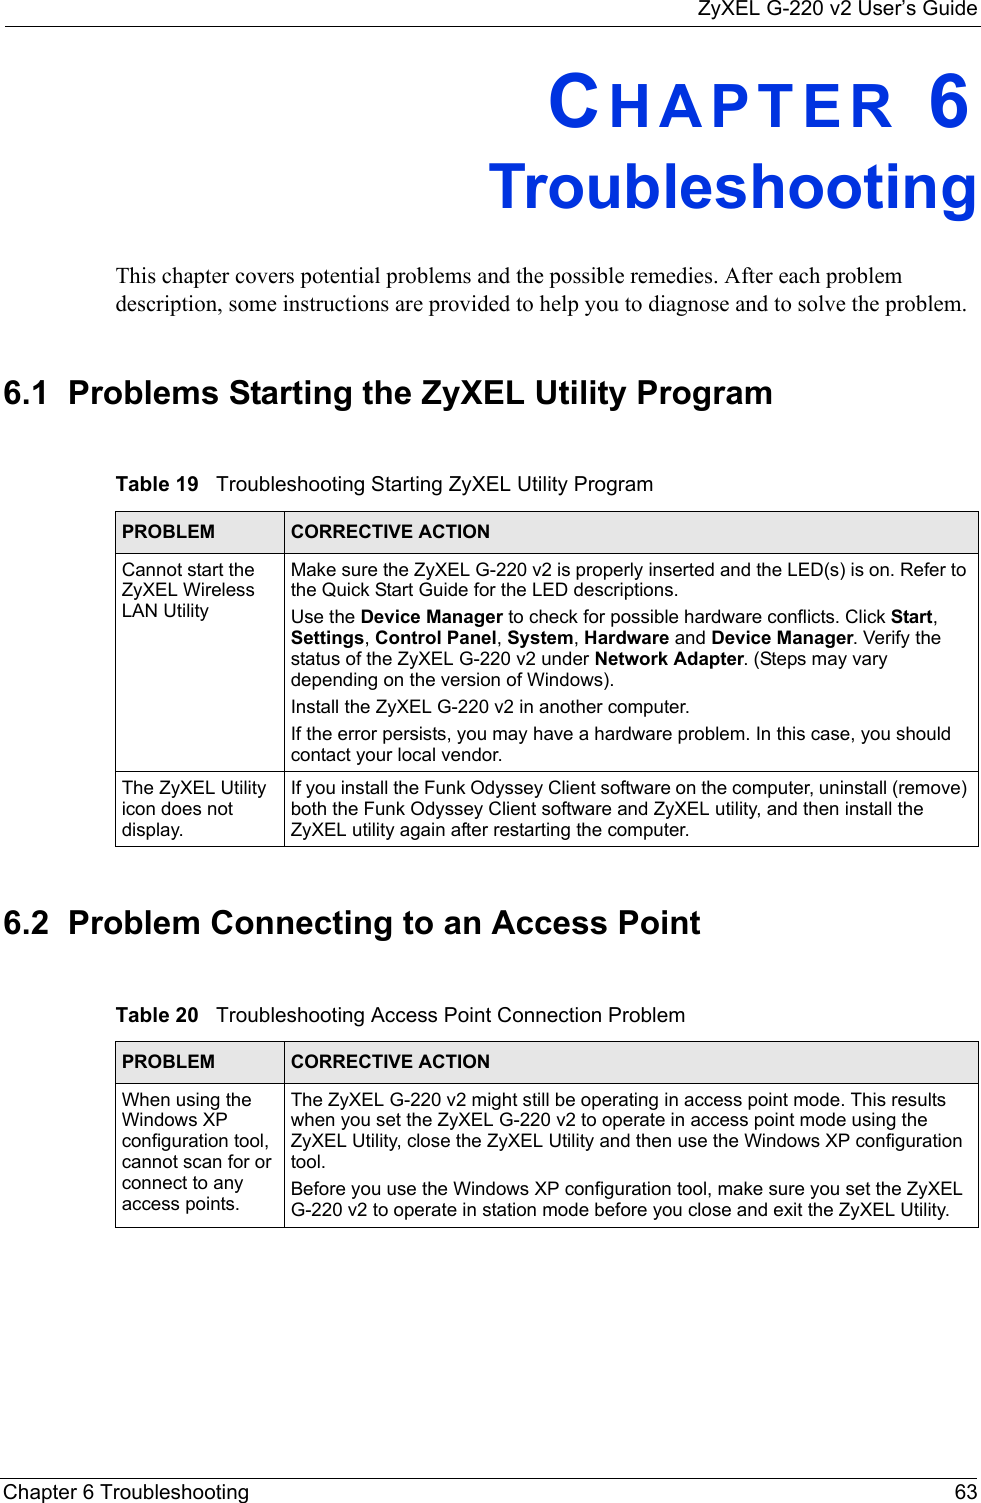 ZyXEL G-220 v2 User’s GuideChapter 6 Troubleshooting 63CHAPTER 6   TroubleshootingThis chapter covers potential problems and the possible remedies. After each problem description, some instructions are provided to help you to diagnose and to solve the problem.6.1  Problems Starting the ZyXEL Utility Program6.2  Problem Connecting to an Access PointTable 19   Troubleshooting Starting ZyXEL Utility Program PROBLEM CORRECTIVE ACTIONCannot start the ZyXEL Wireless LAN UtilityMake sure the ZyXEL G-220 v2 is properly inserted and the LED(s) is on. Refer to the Quick Start Guide for the LED descriptions.Use the Device Manager to check for possible hardware conflicts. Click Start, Settings, Control Panel, System, Hardware and Device Manager. Verify the status of the ZyXEL G-220 v2 under Network Adapter. (Steps may vary depending on the version of Windows). Install the ZyXEL G-220 v2 in another computer.If the error persists, you may have a hardware problem. In this case, you should contact your local vendor.The ZyXEL Utility icon does not display.If you install the Funk Odyssey Client software on the computer, uninstall (remove) both the Funk Odyssey Client software and ZyXEL utility, and then install the ZyXEL utility again after restarting the computer.Table 20   Troubleshooting Access Point Connection Problem PROBLEM CORRECTIVE ACTION When using the Windows XP configuration tool, cannot scan for or connect to any access points.The ZyXEL G-220 v2 might still be operating in access point mode. This results when you set the ZyXEL G-220 v2 to operate in access point mode using the ZyXEL Utility, close the ZyXEL Utility and then use the Windows XP configuration tool.Before you use the Windows XP configuration tool, make sure you set the ZyXEL G-220 v2 to operate in station mode before you close and exit the ZyXEL Utility.